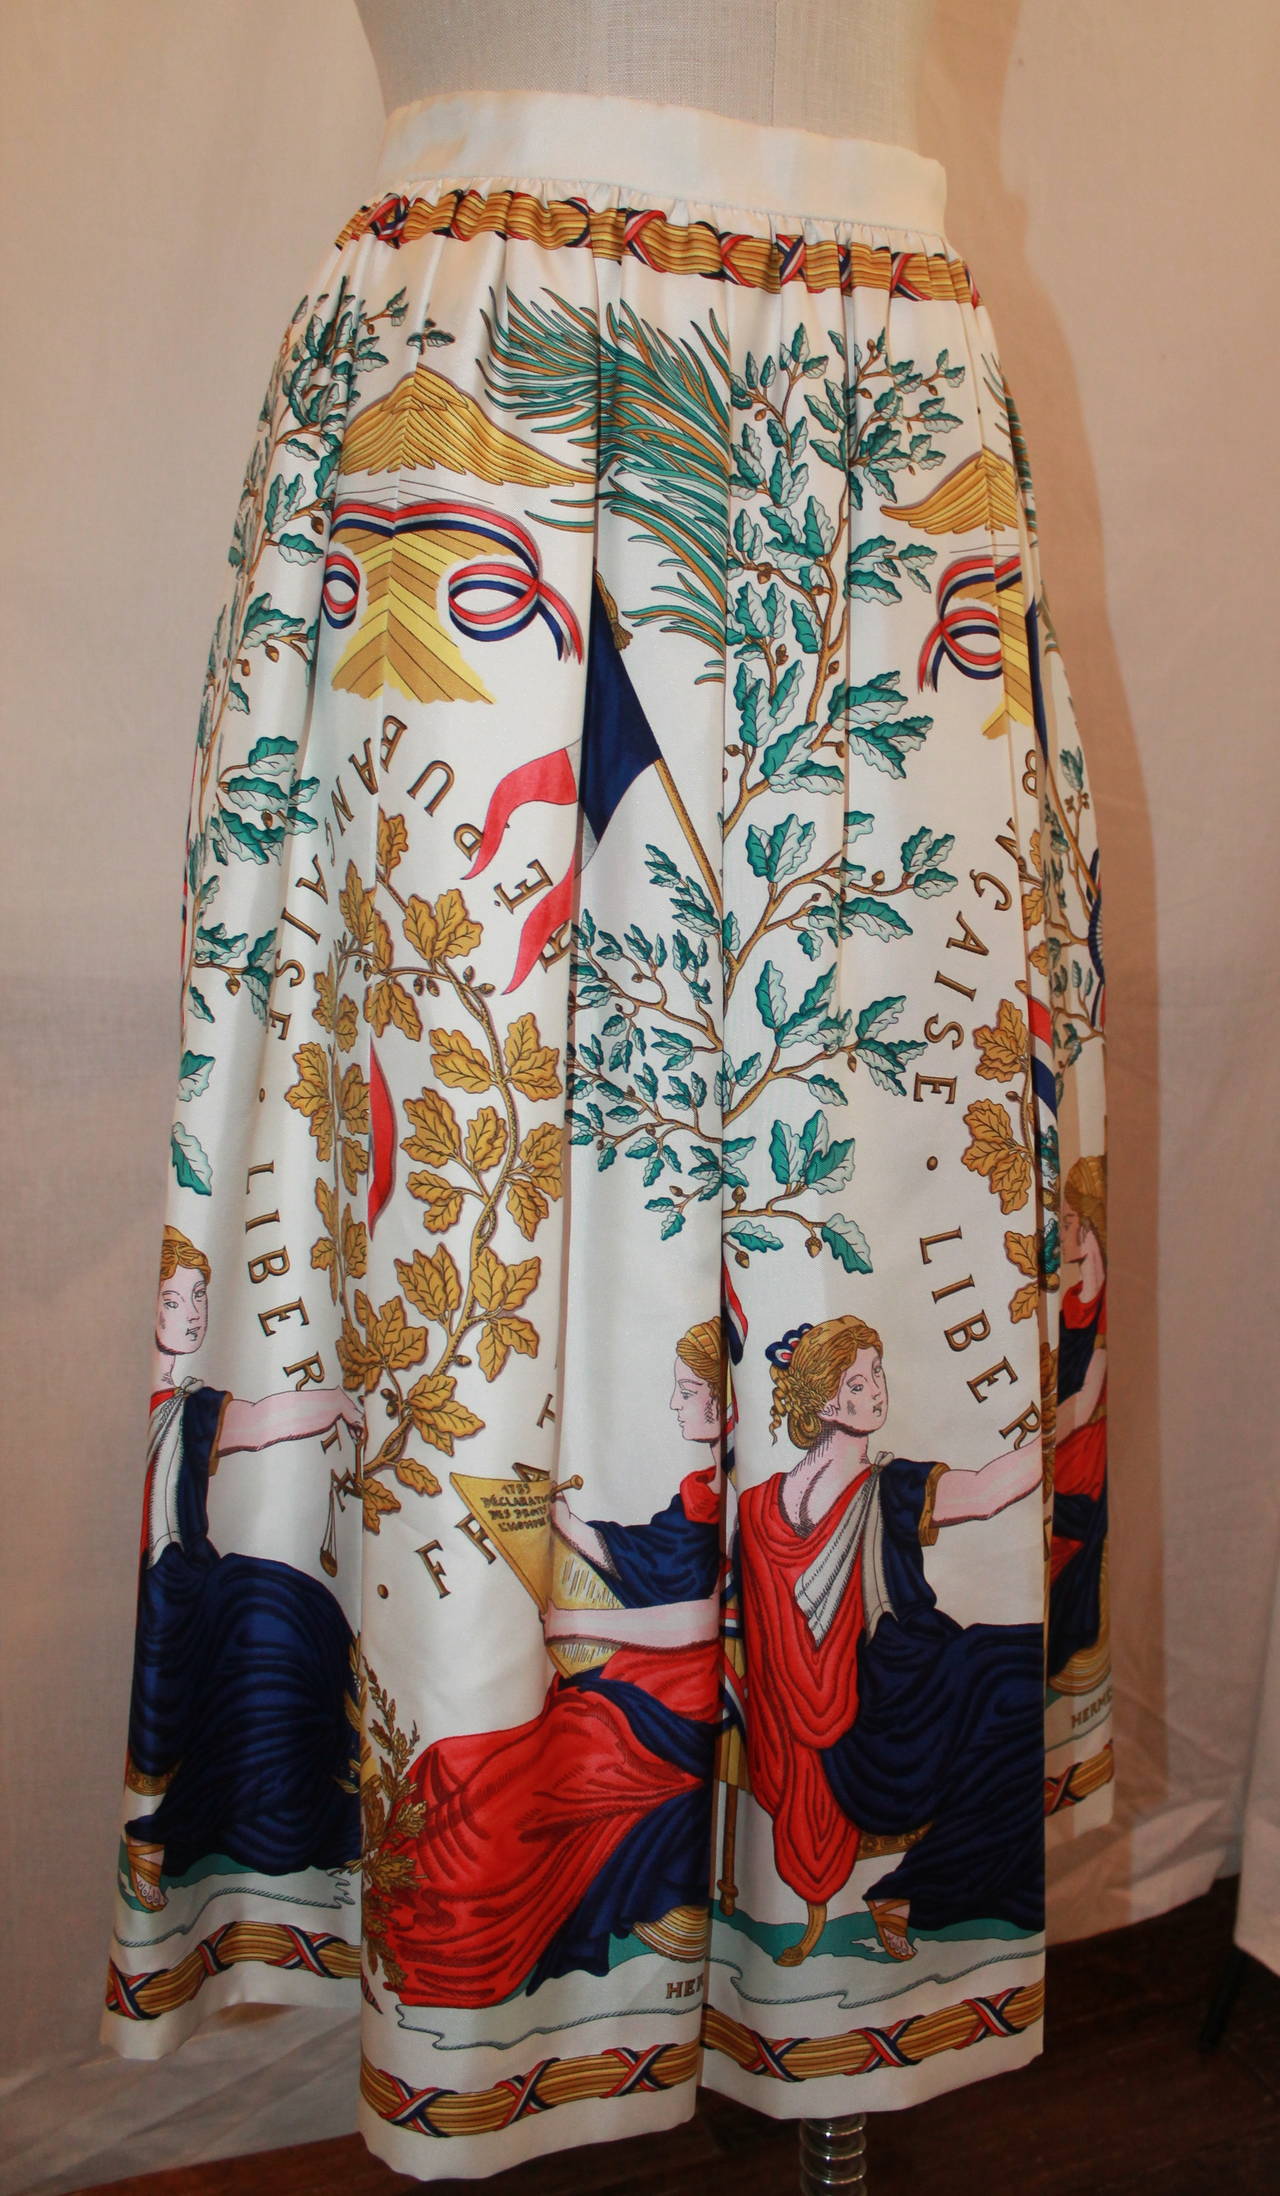 Hermes Vintage Silk Liberty Printed Skirt - circa 1990s - 34. This skirt is in excellent condition with no visible markings. It reaches to just below the knee on most. 

Measurements:
Waist- 26